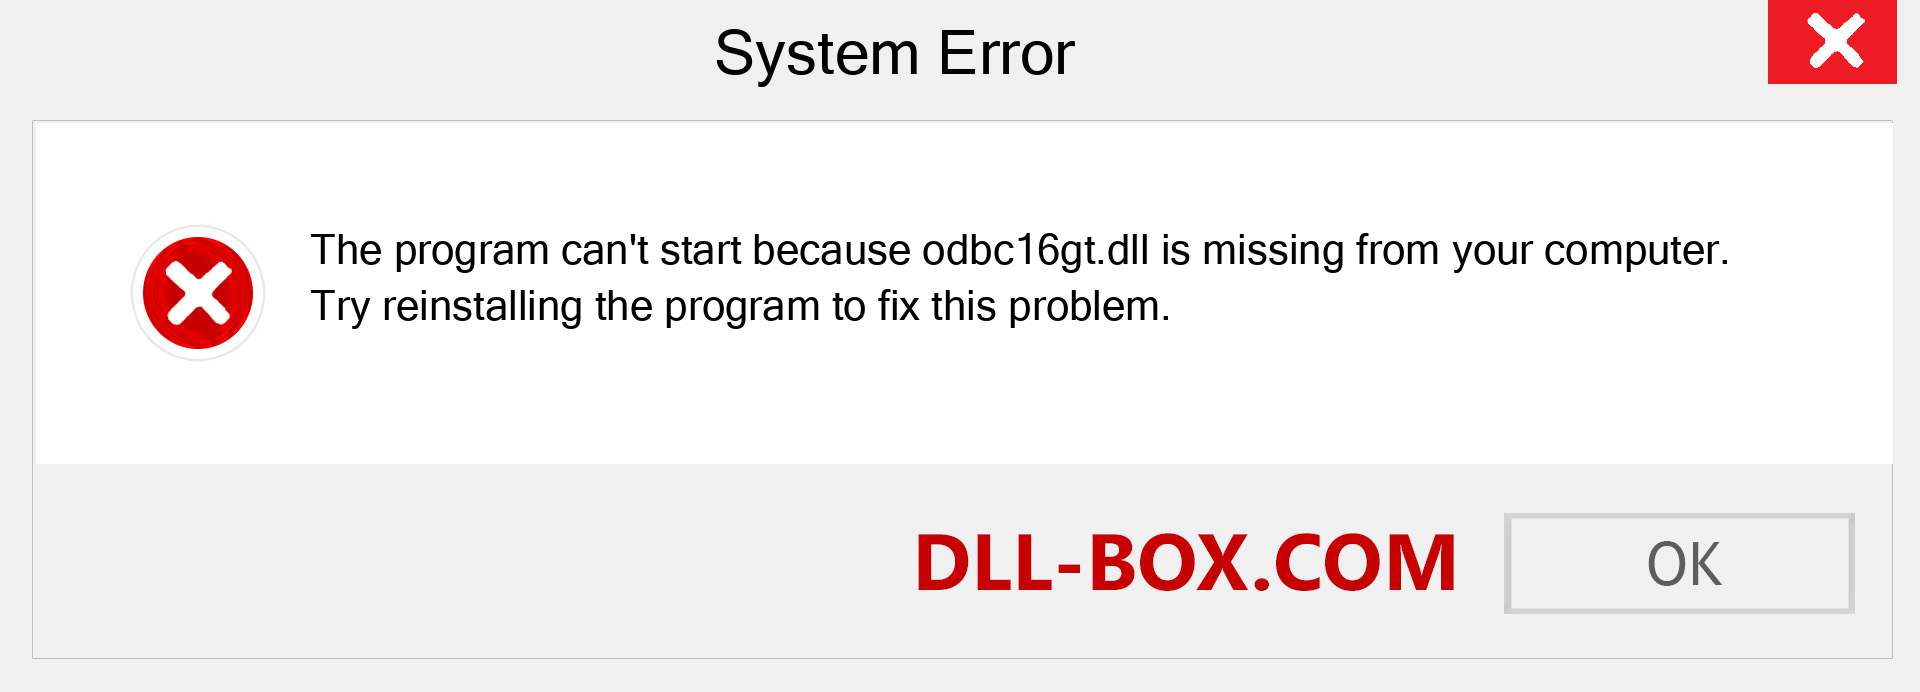  odbc16gt.dll file is missing?. Download for Windows 7, 8, 10 - Fix  odbc16gt dll Missing Error on Windows, photos, images